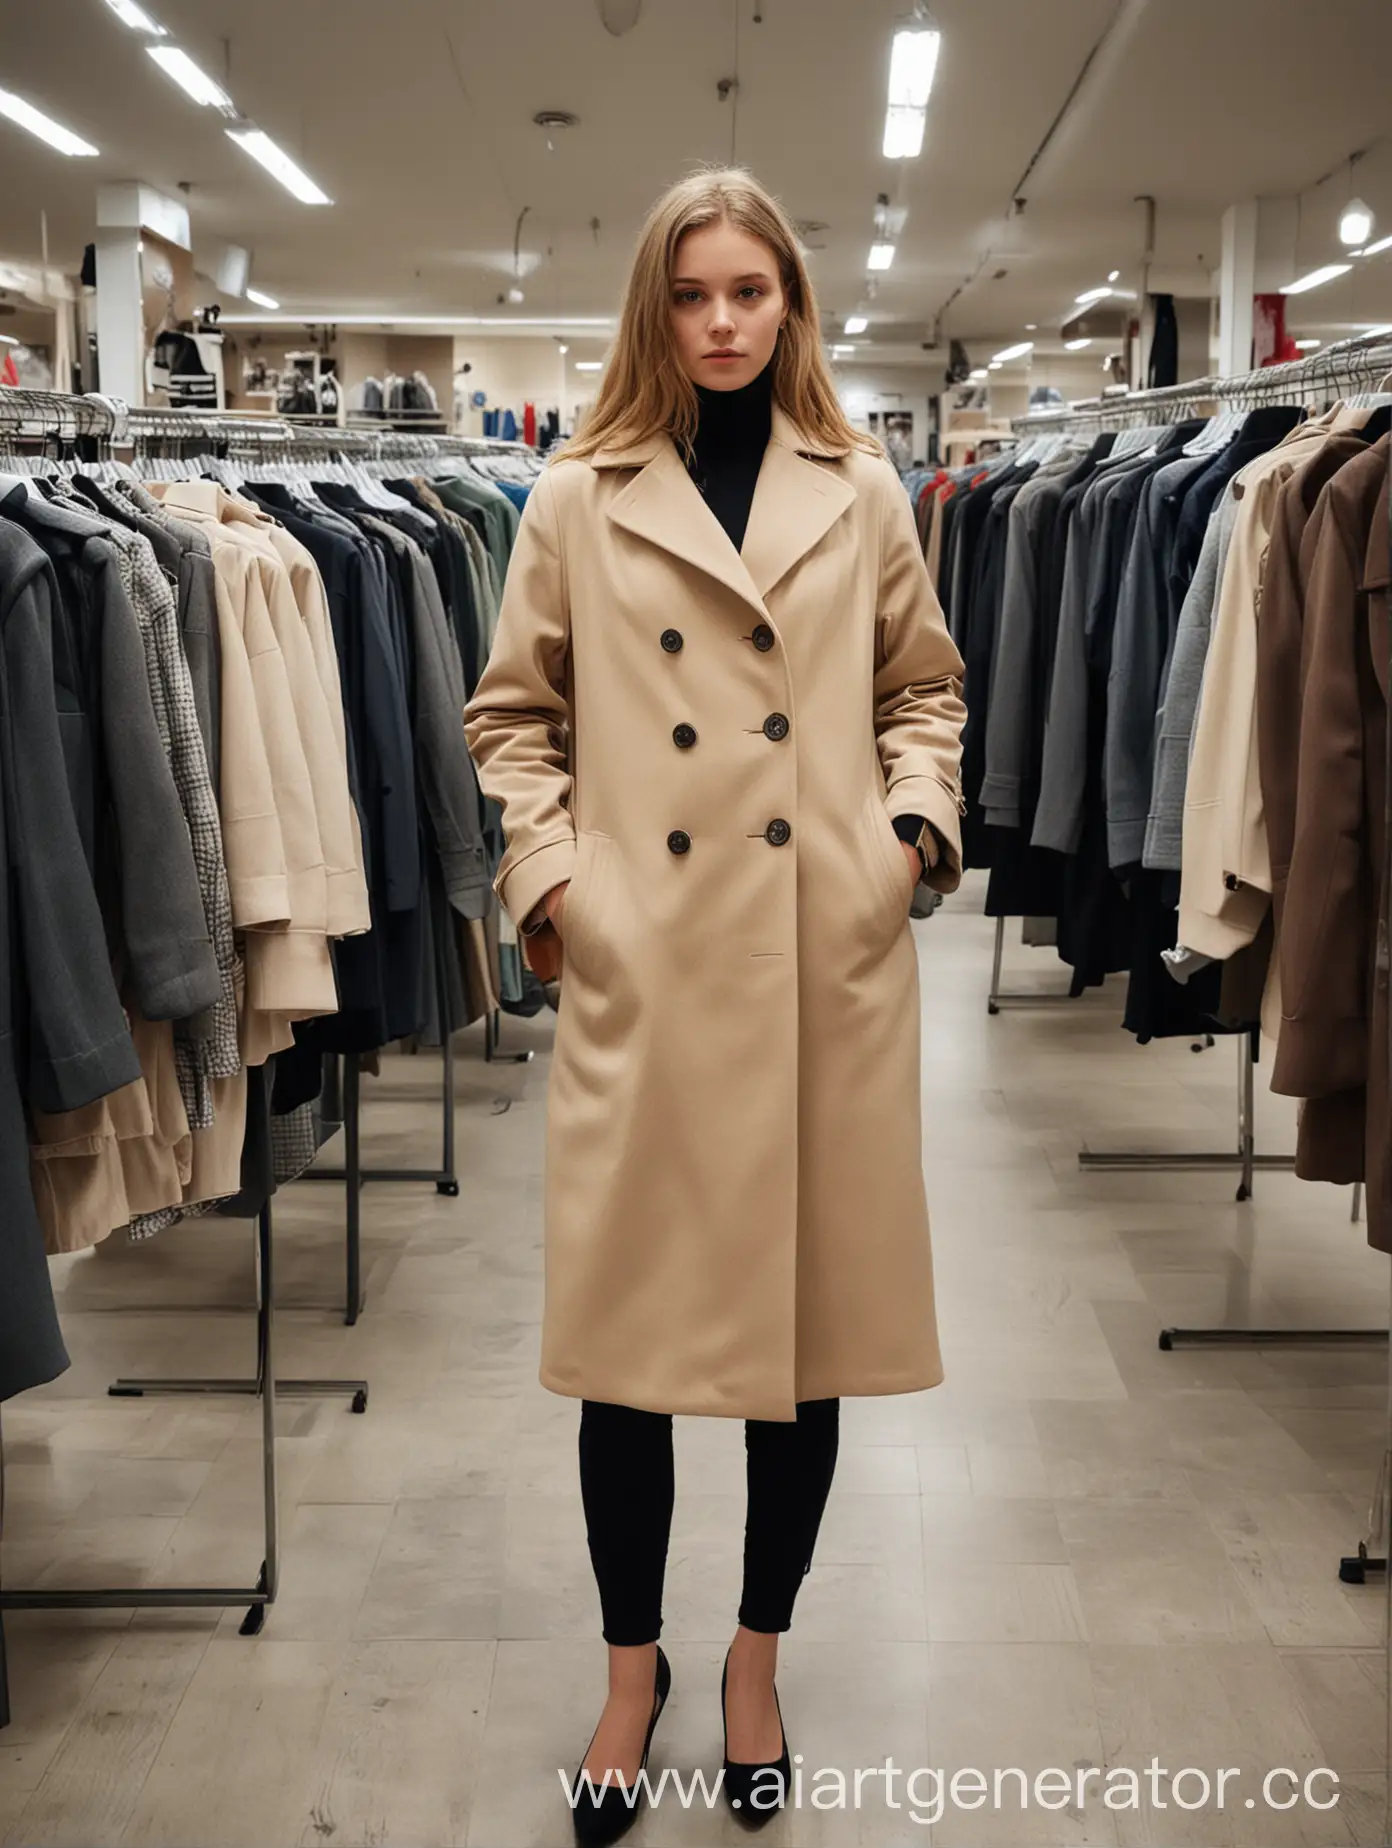 Young-Woman-Trying-on-Coat-in-Brightly-Lit-Womens-Clothing-Store